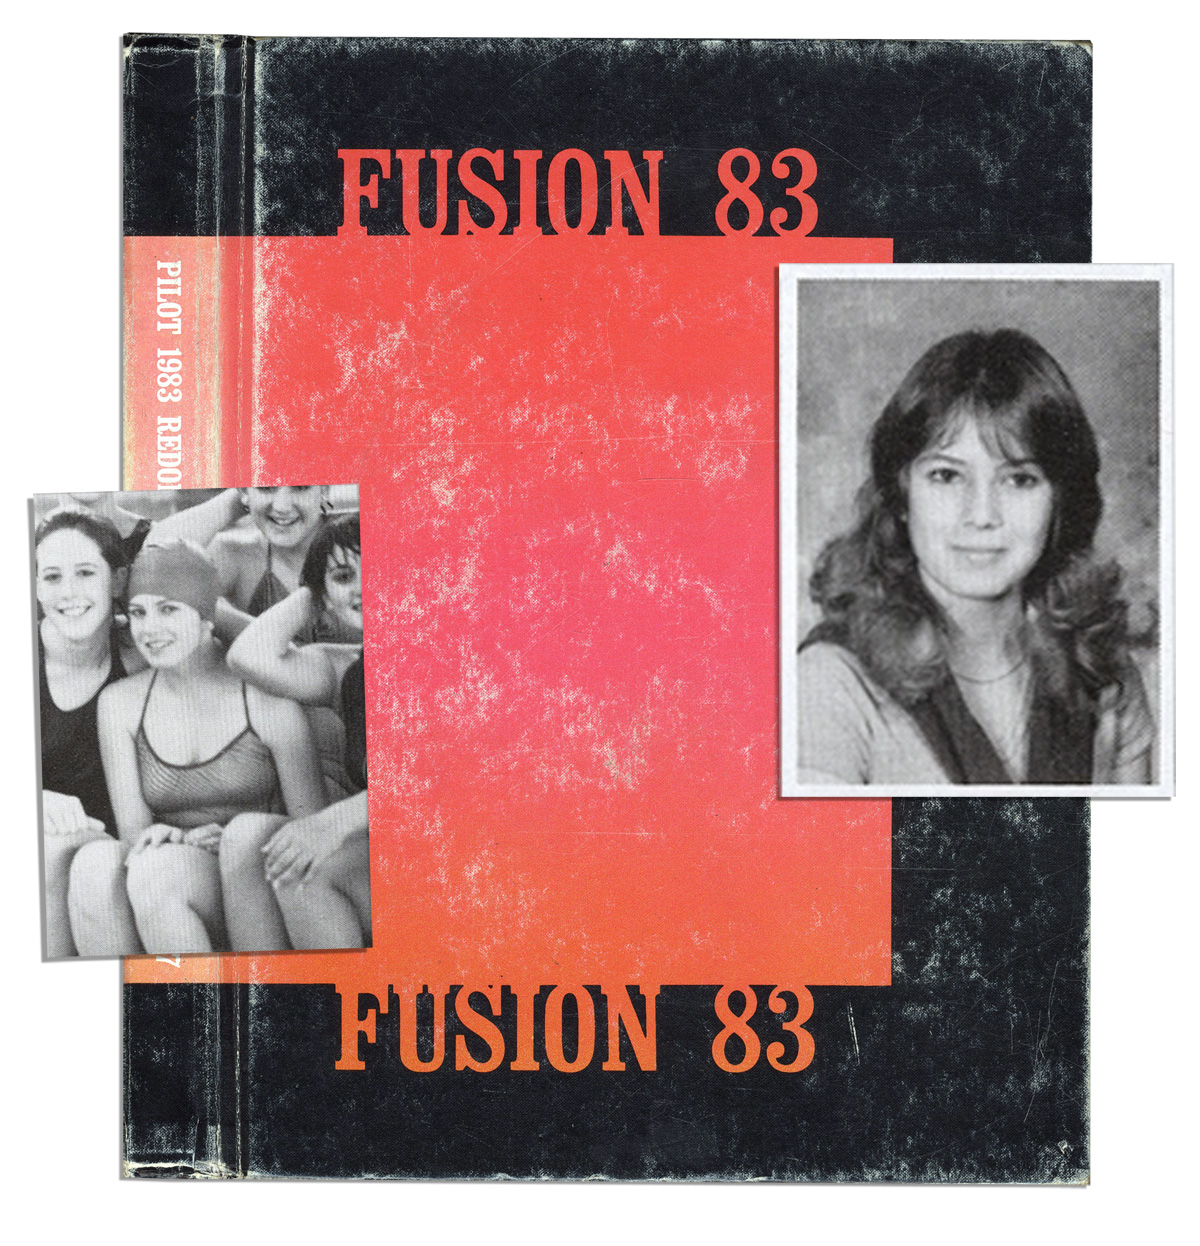 Lot Detail Underage Adult Film Star Traci Lords High School Yearbook Her Only Yearbook Appearance Before Dropping Out